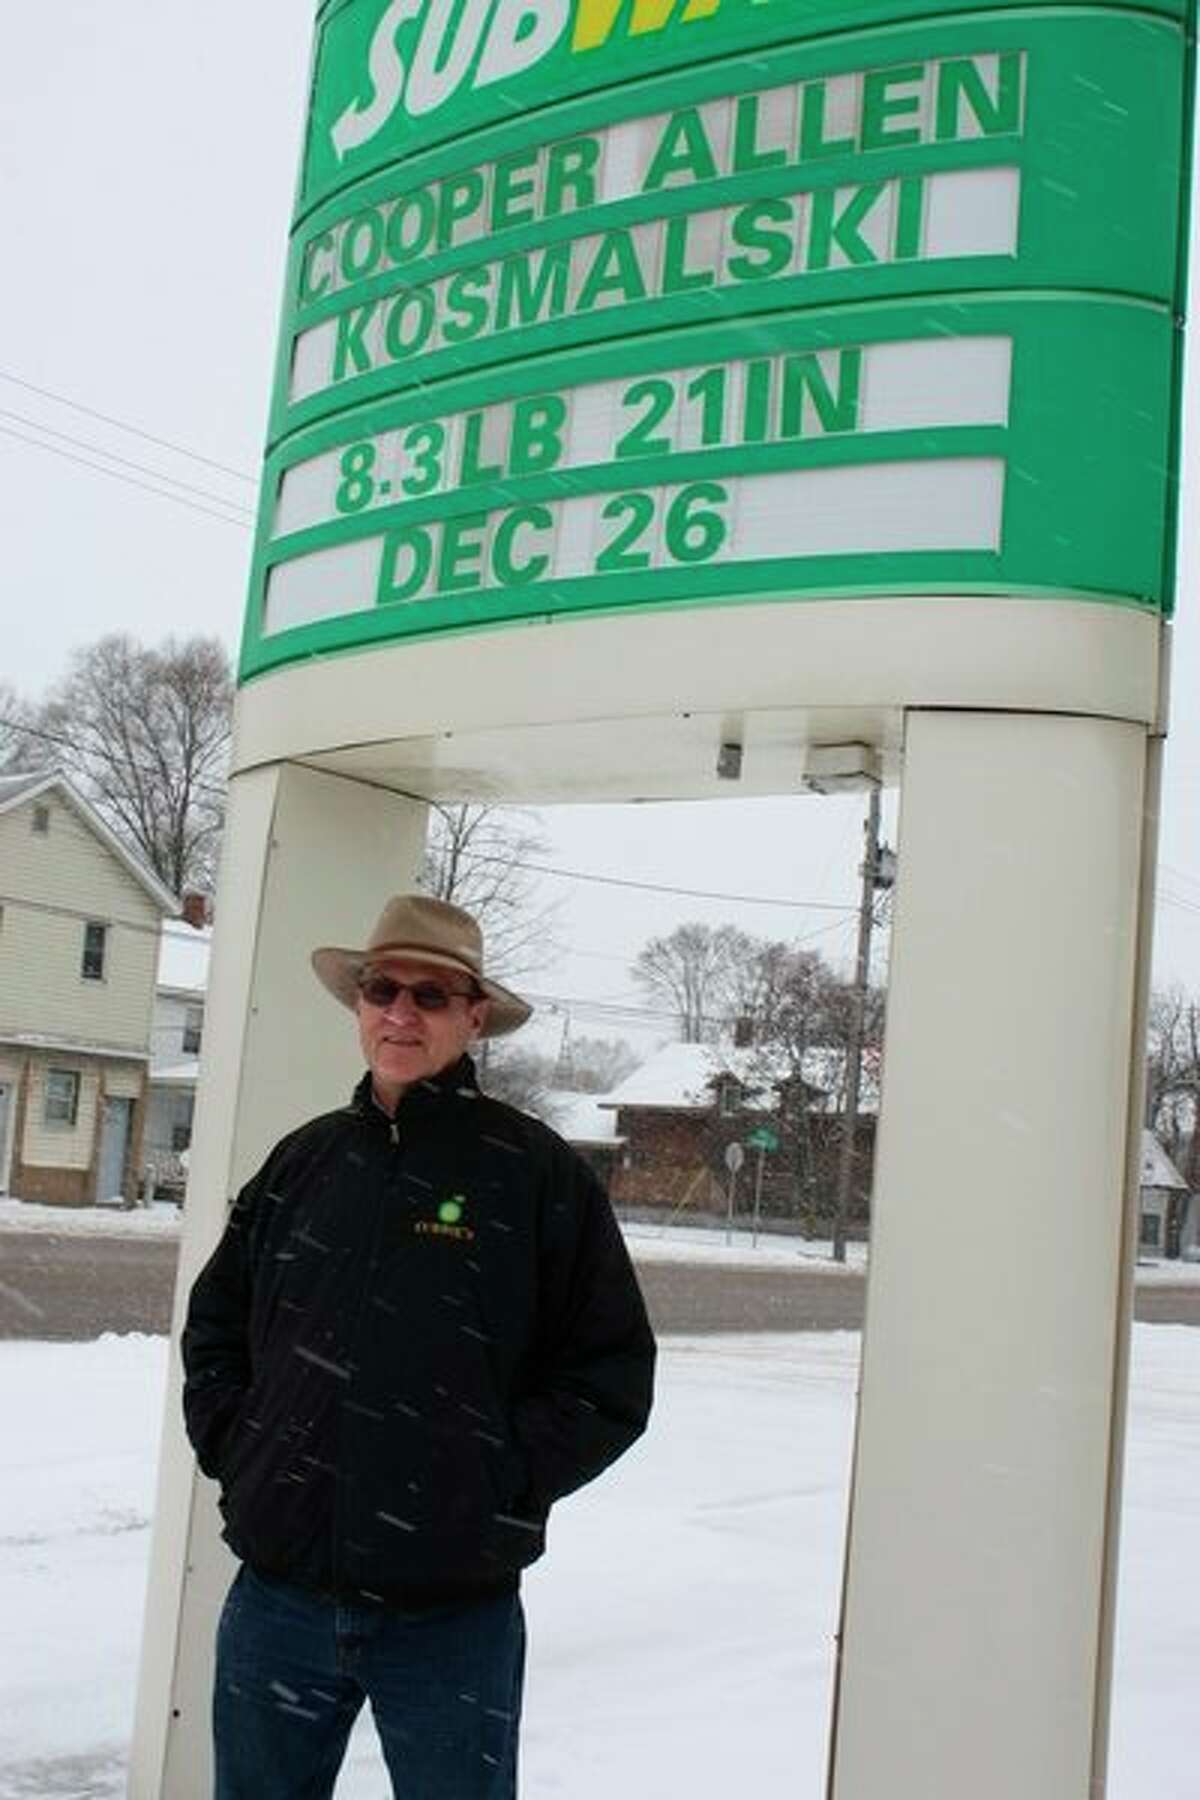 Pat Currie stands underneath the marquee of the BP gas station he owns, 620 Maple St., in Big Rapids. For more than 20 years, Currie has used the marquee to inform drivers and passersby of local news, such as births, deaths, anniversaries and more. (Pioneer photo/Tim Rath)